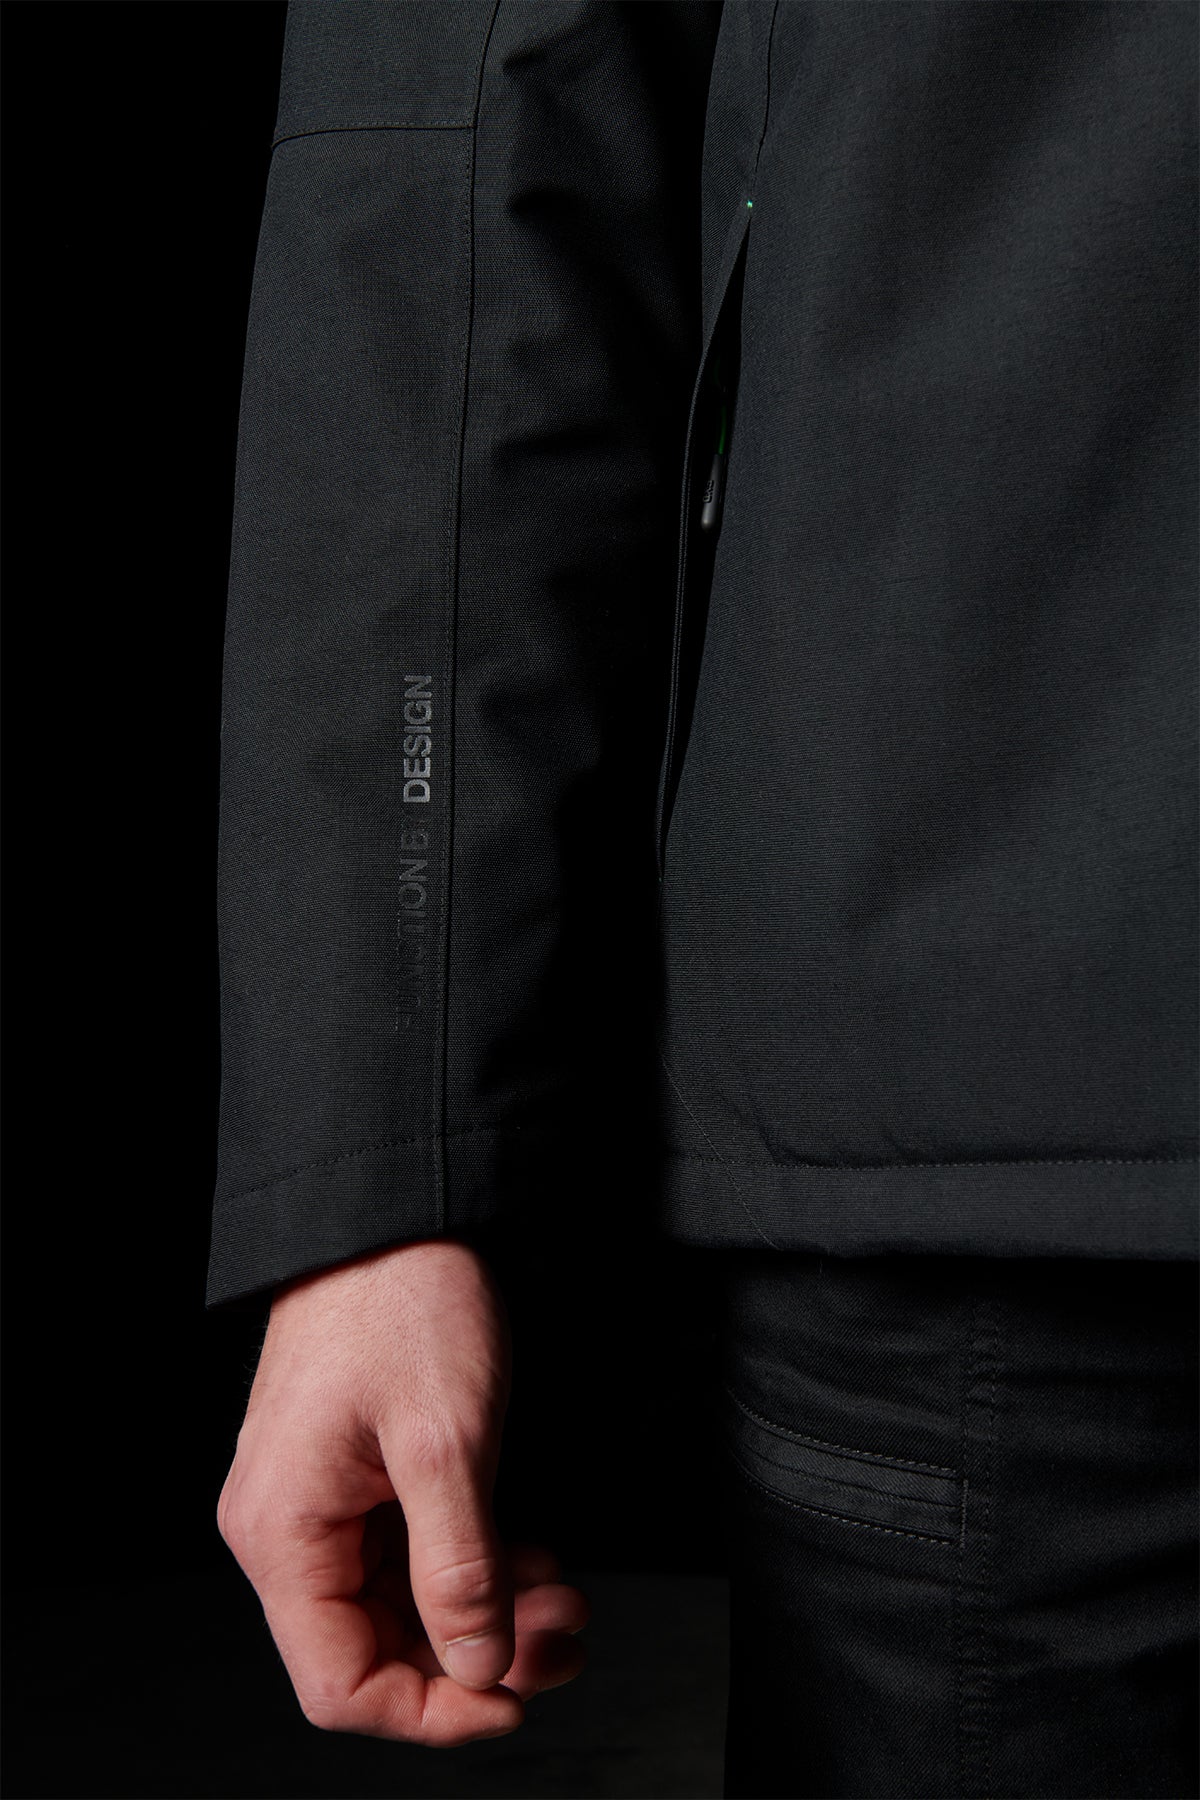 Sleeve detailing of the WO-1 Black